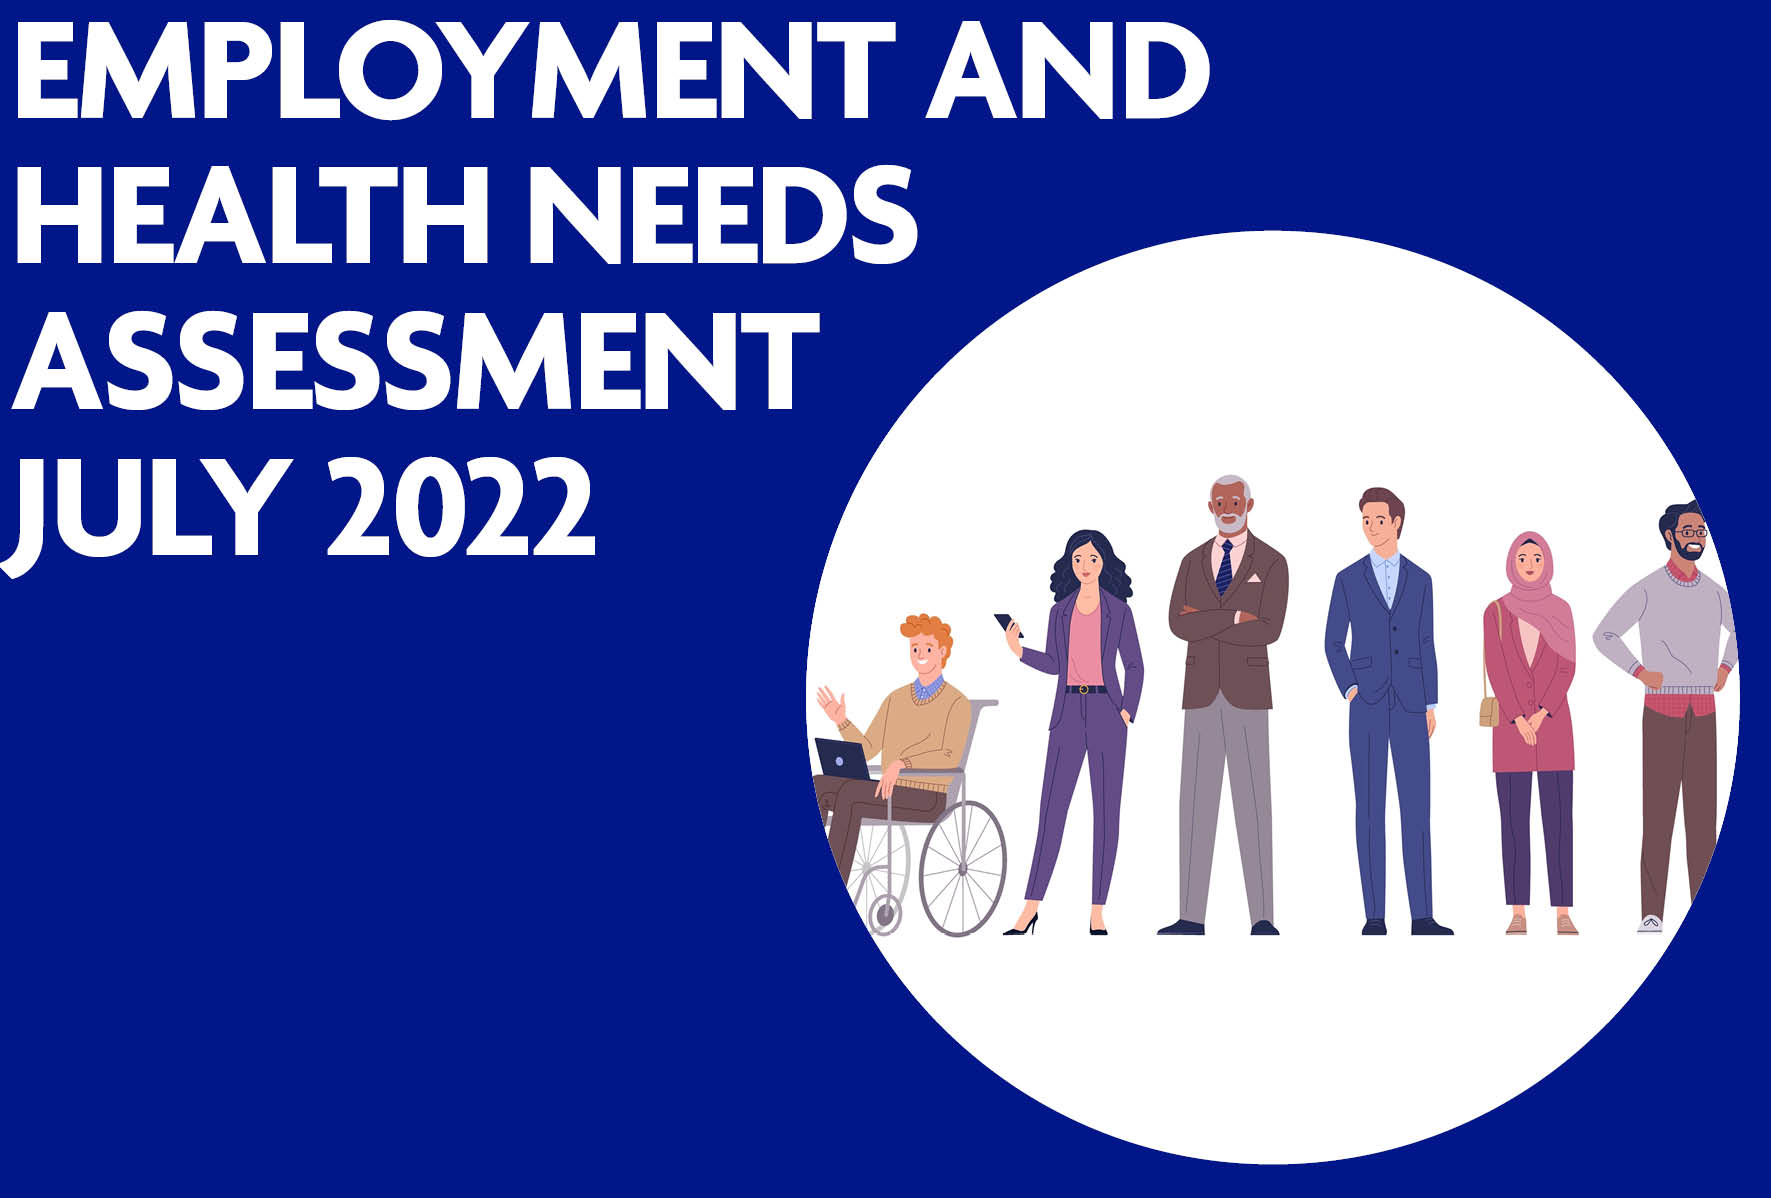 employment and health needs assessment july 2022 